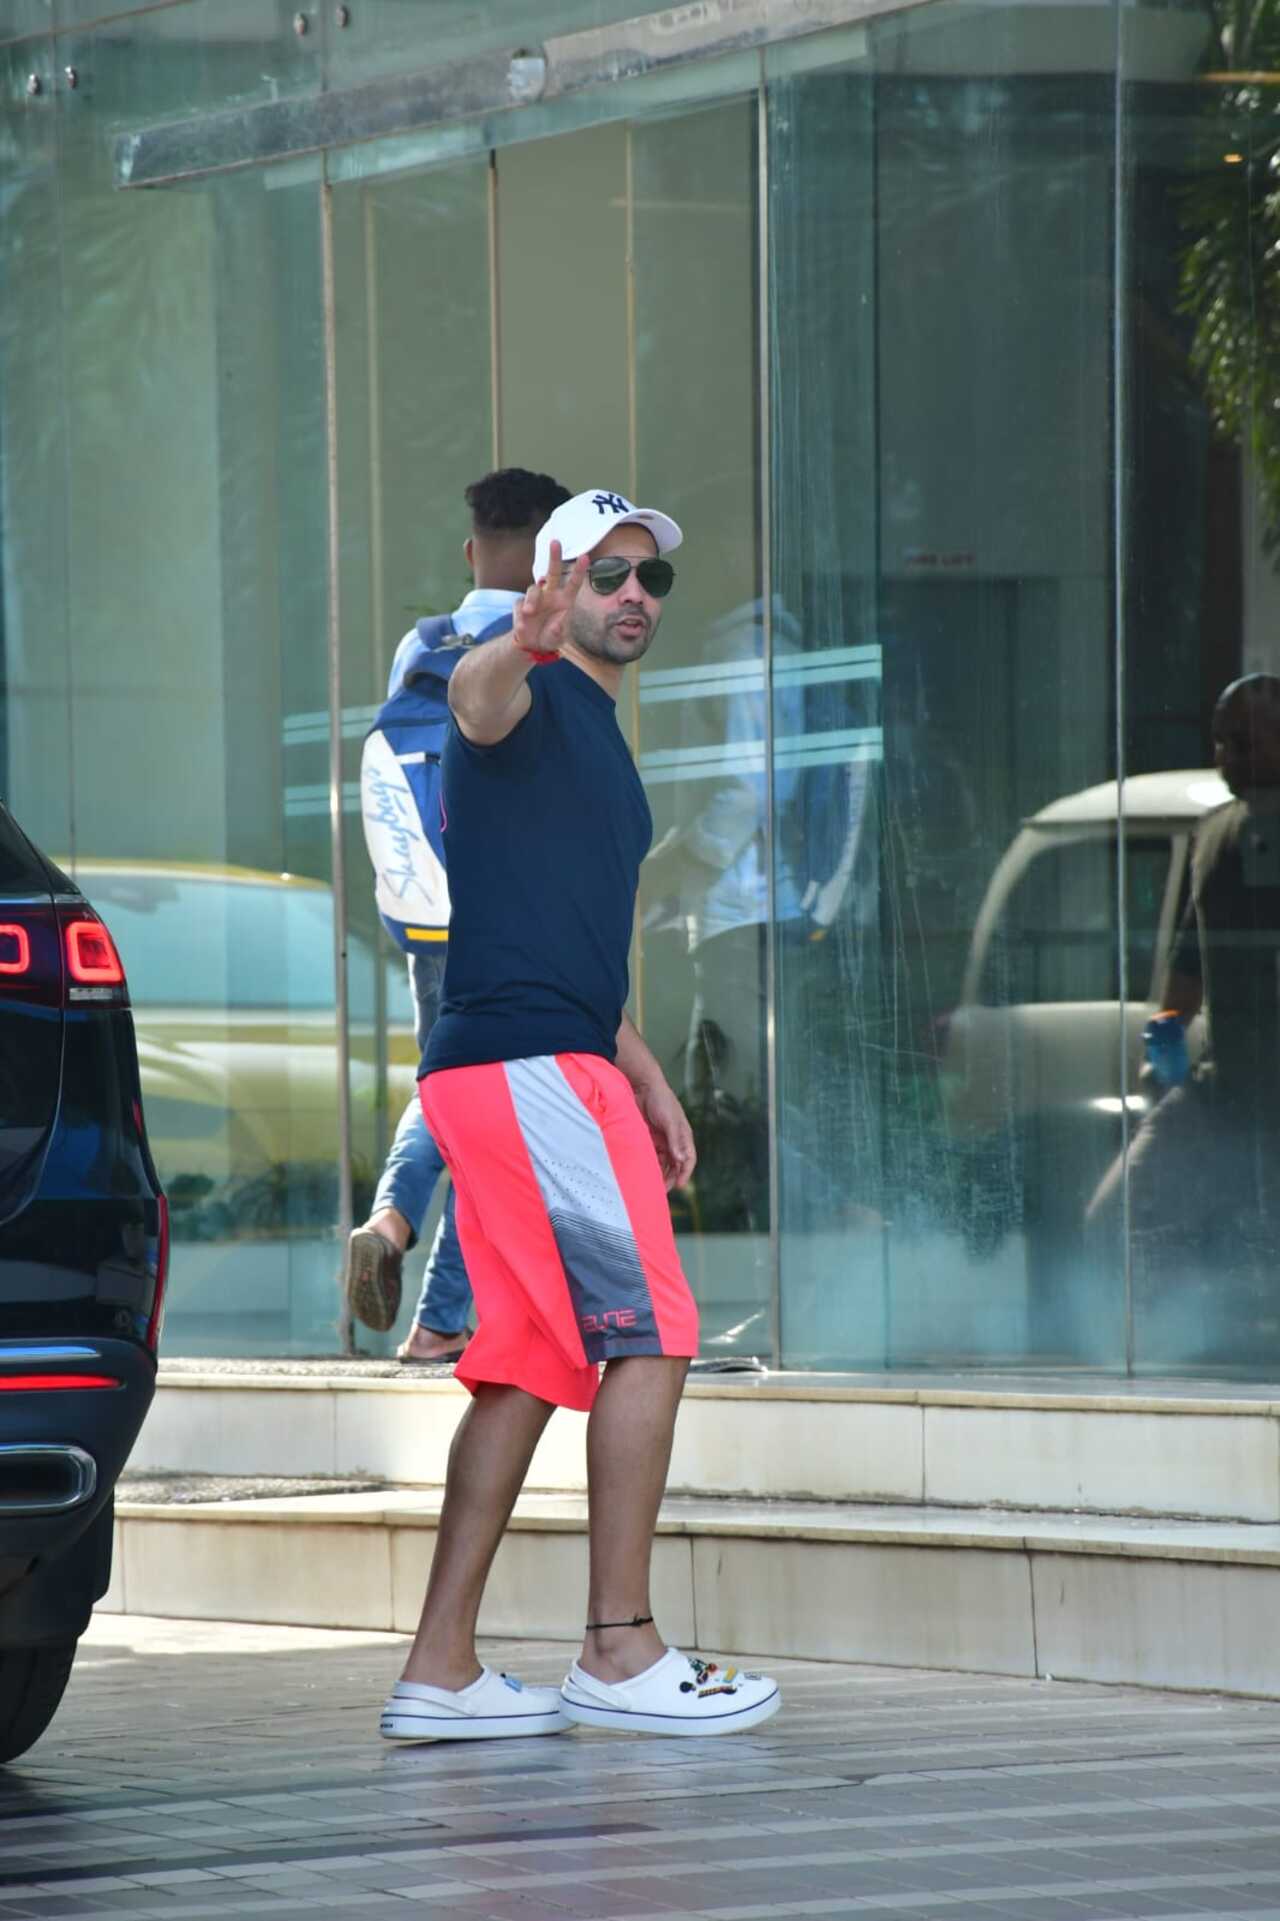 Varun was dressed in shorts and a T-shirt